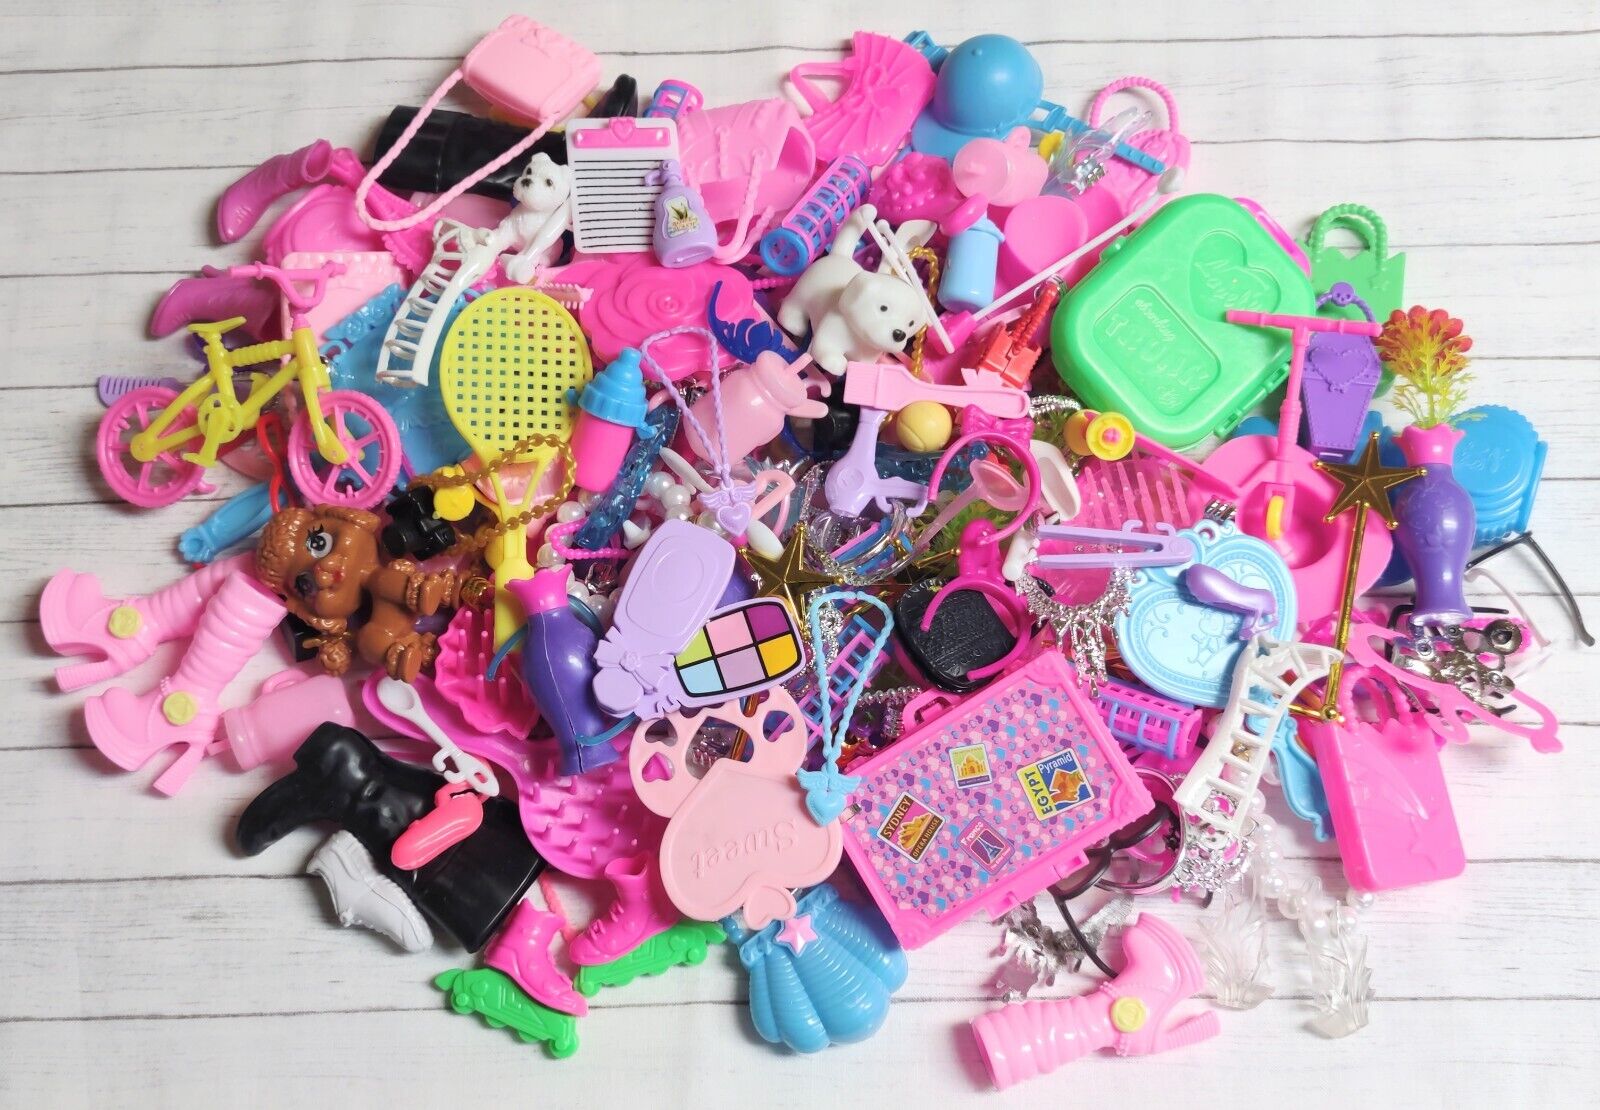 50pcs. Fashion Doll Accessories-purses, shoes, brushes, and more